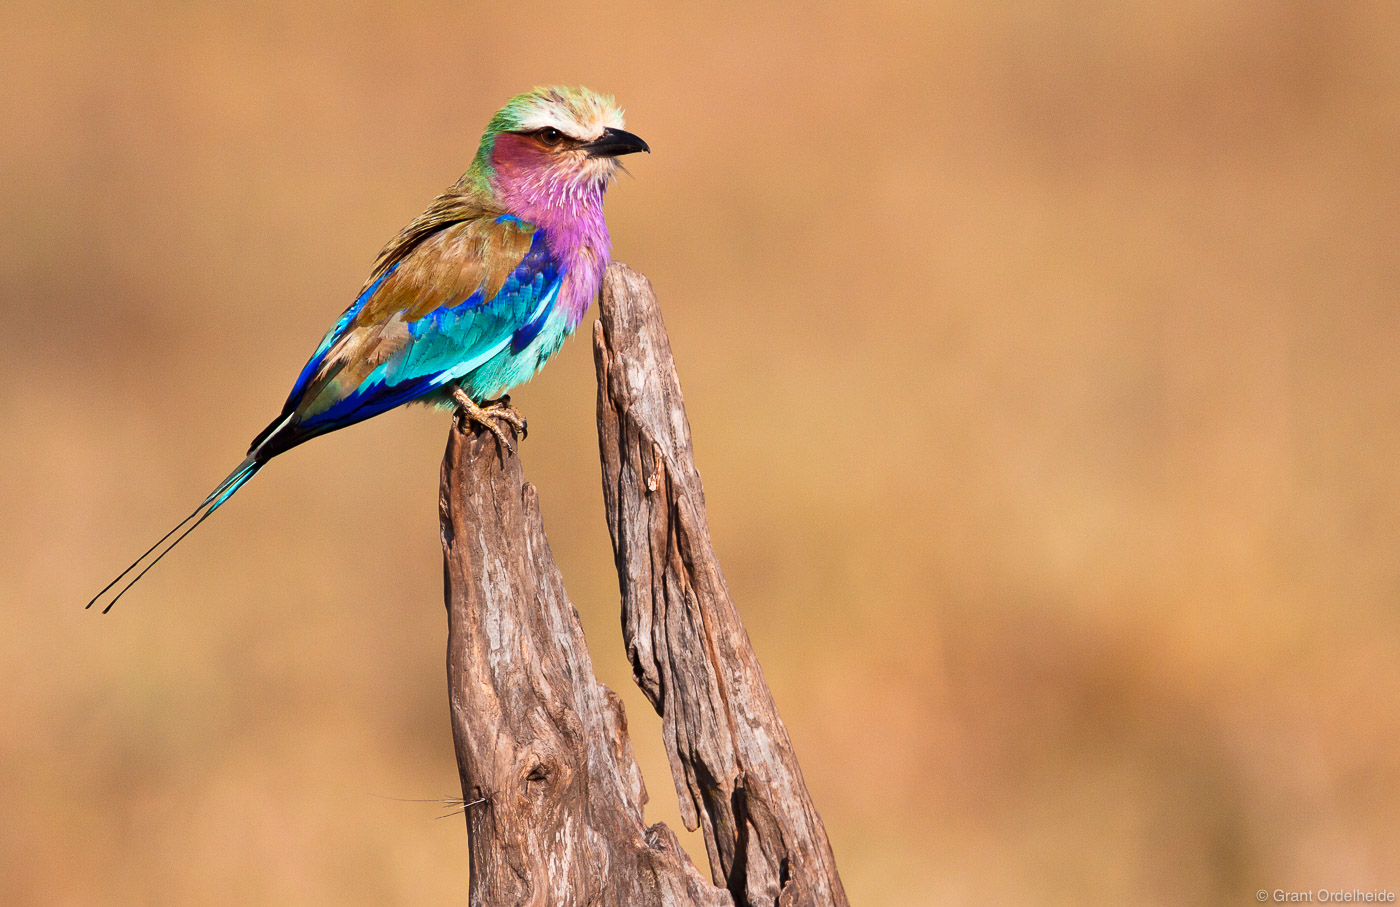 A colorful Lilac Breasted Roller near the Mara river.